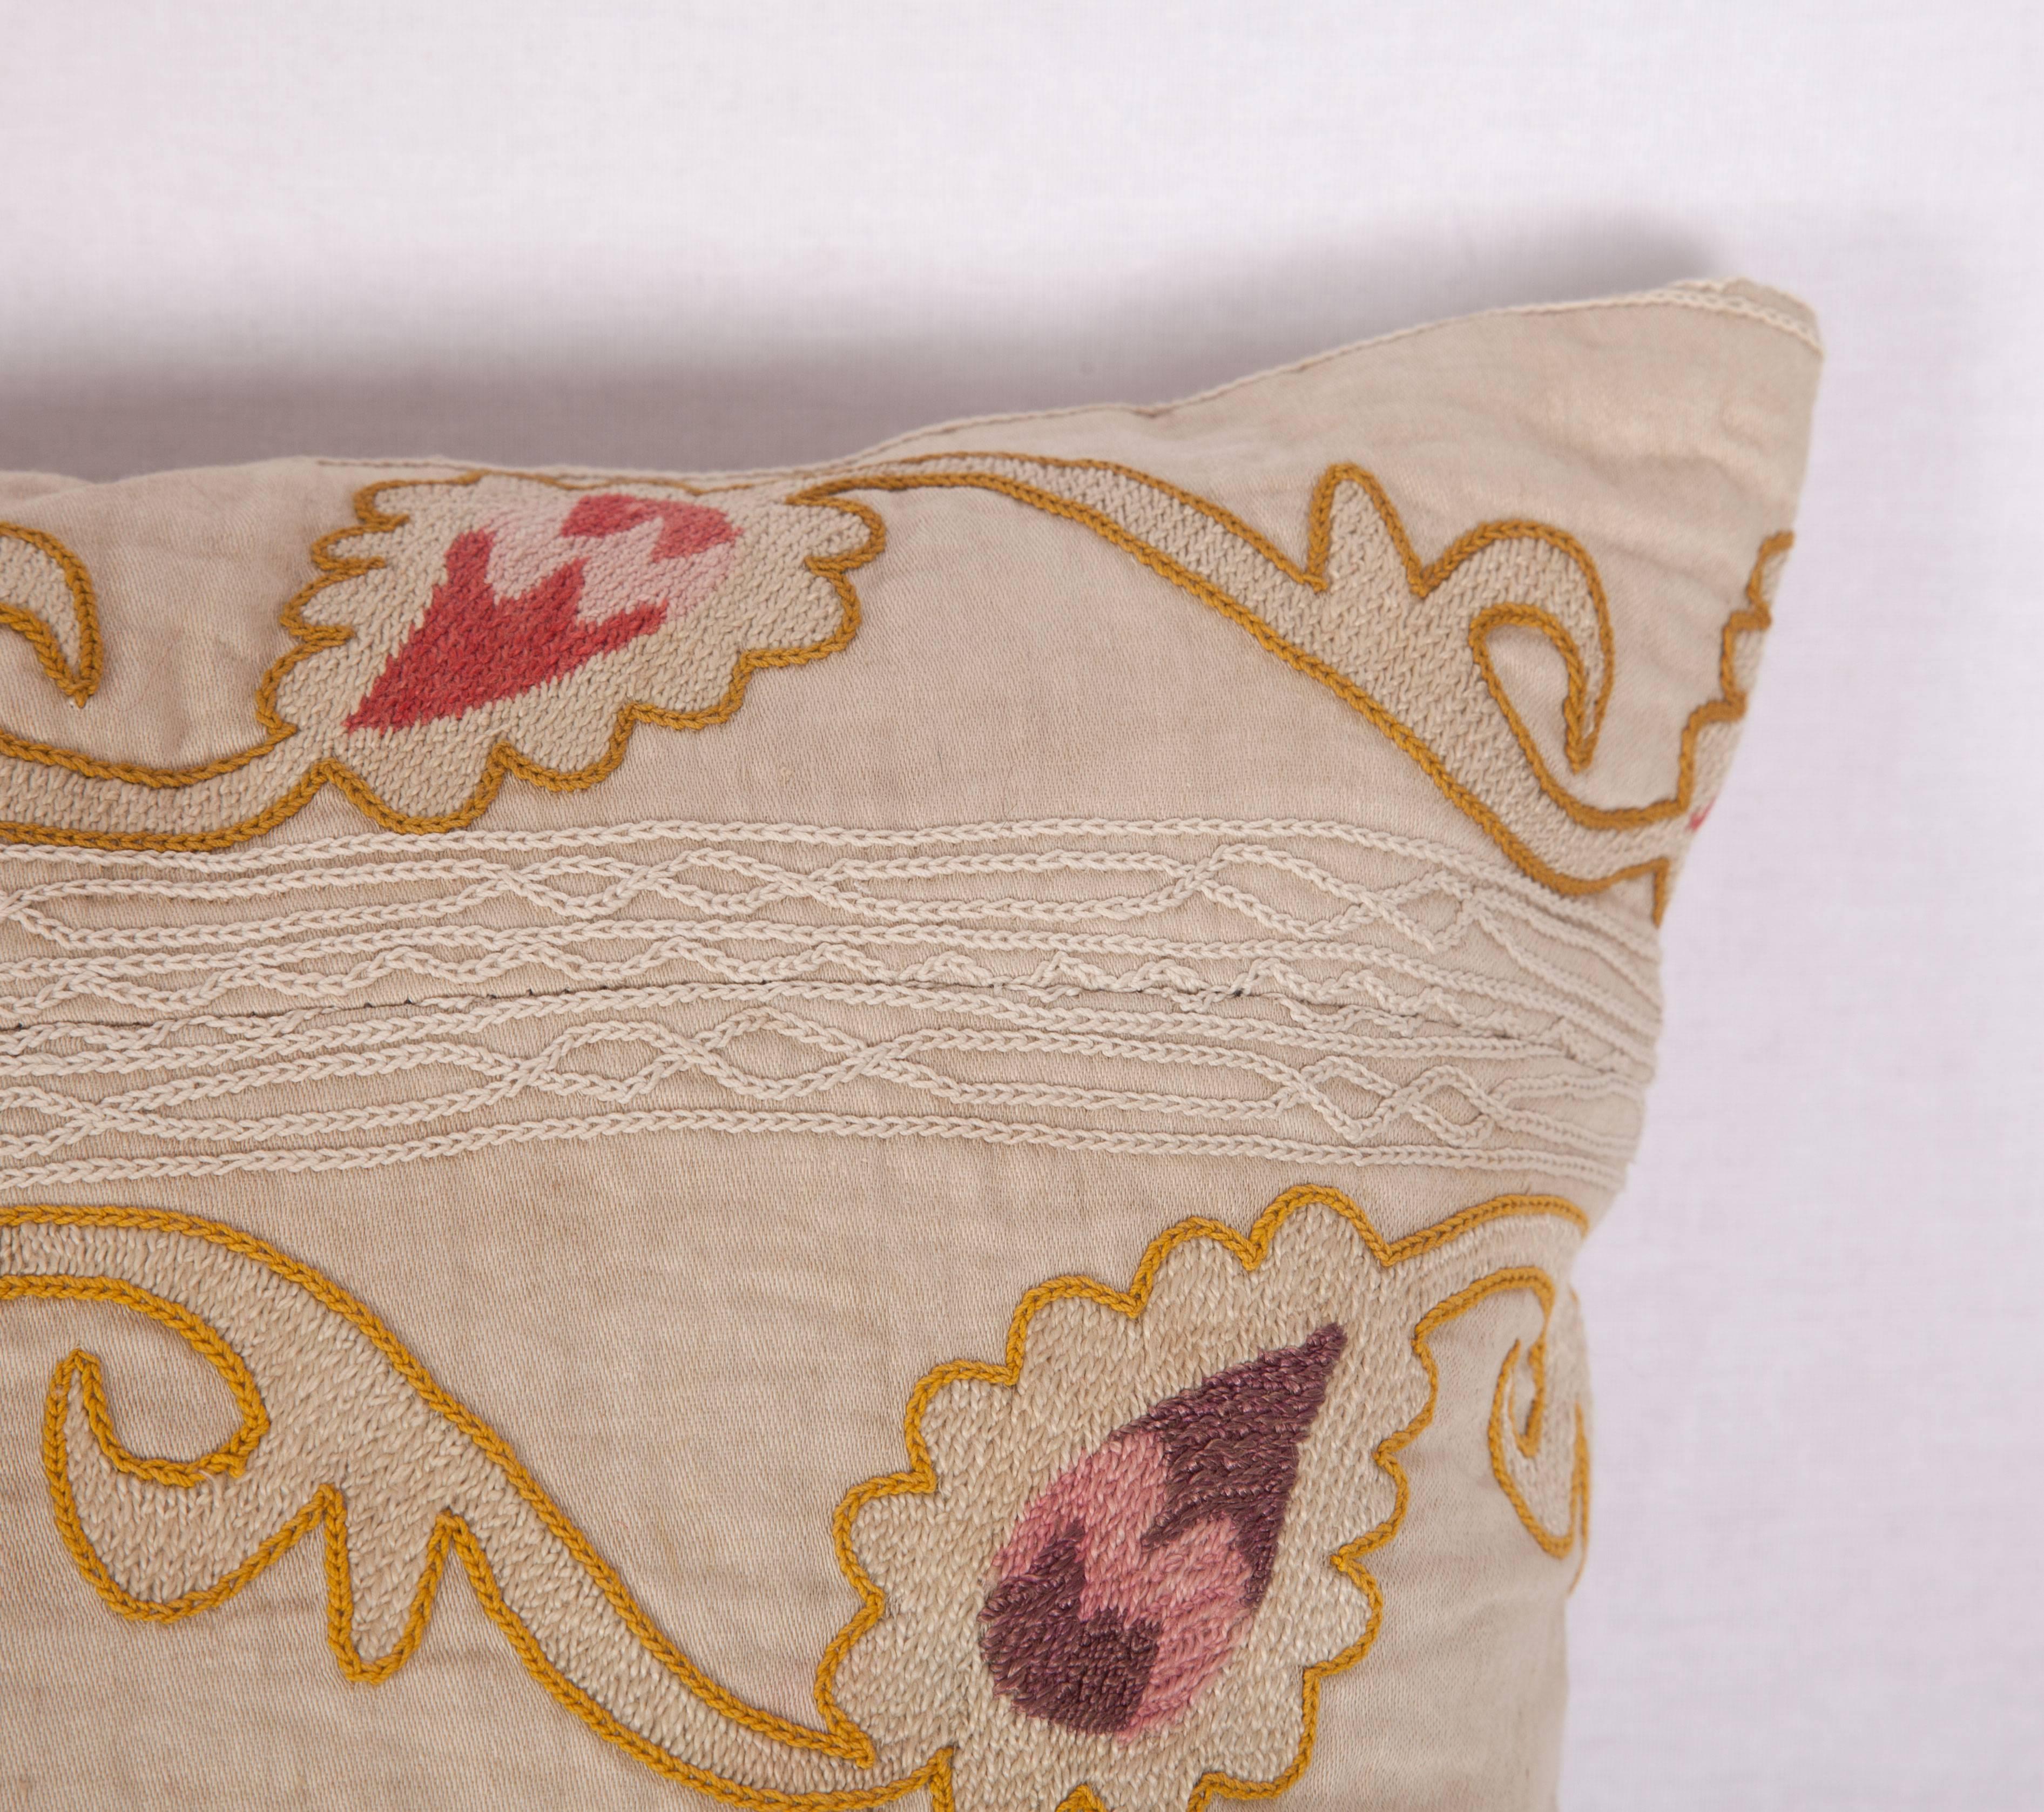 Embroidered Pillow Case Made Out of an Early-20th Century Uzbek Samarkand Suzani